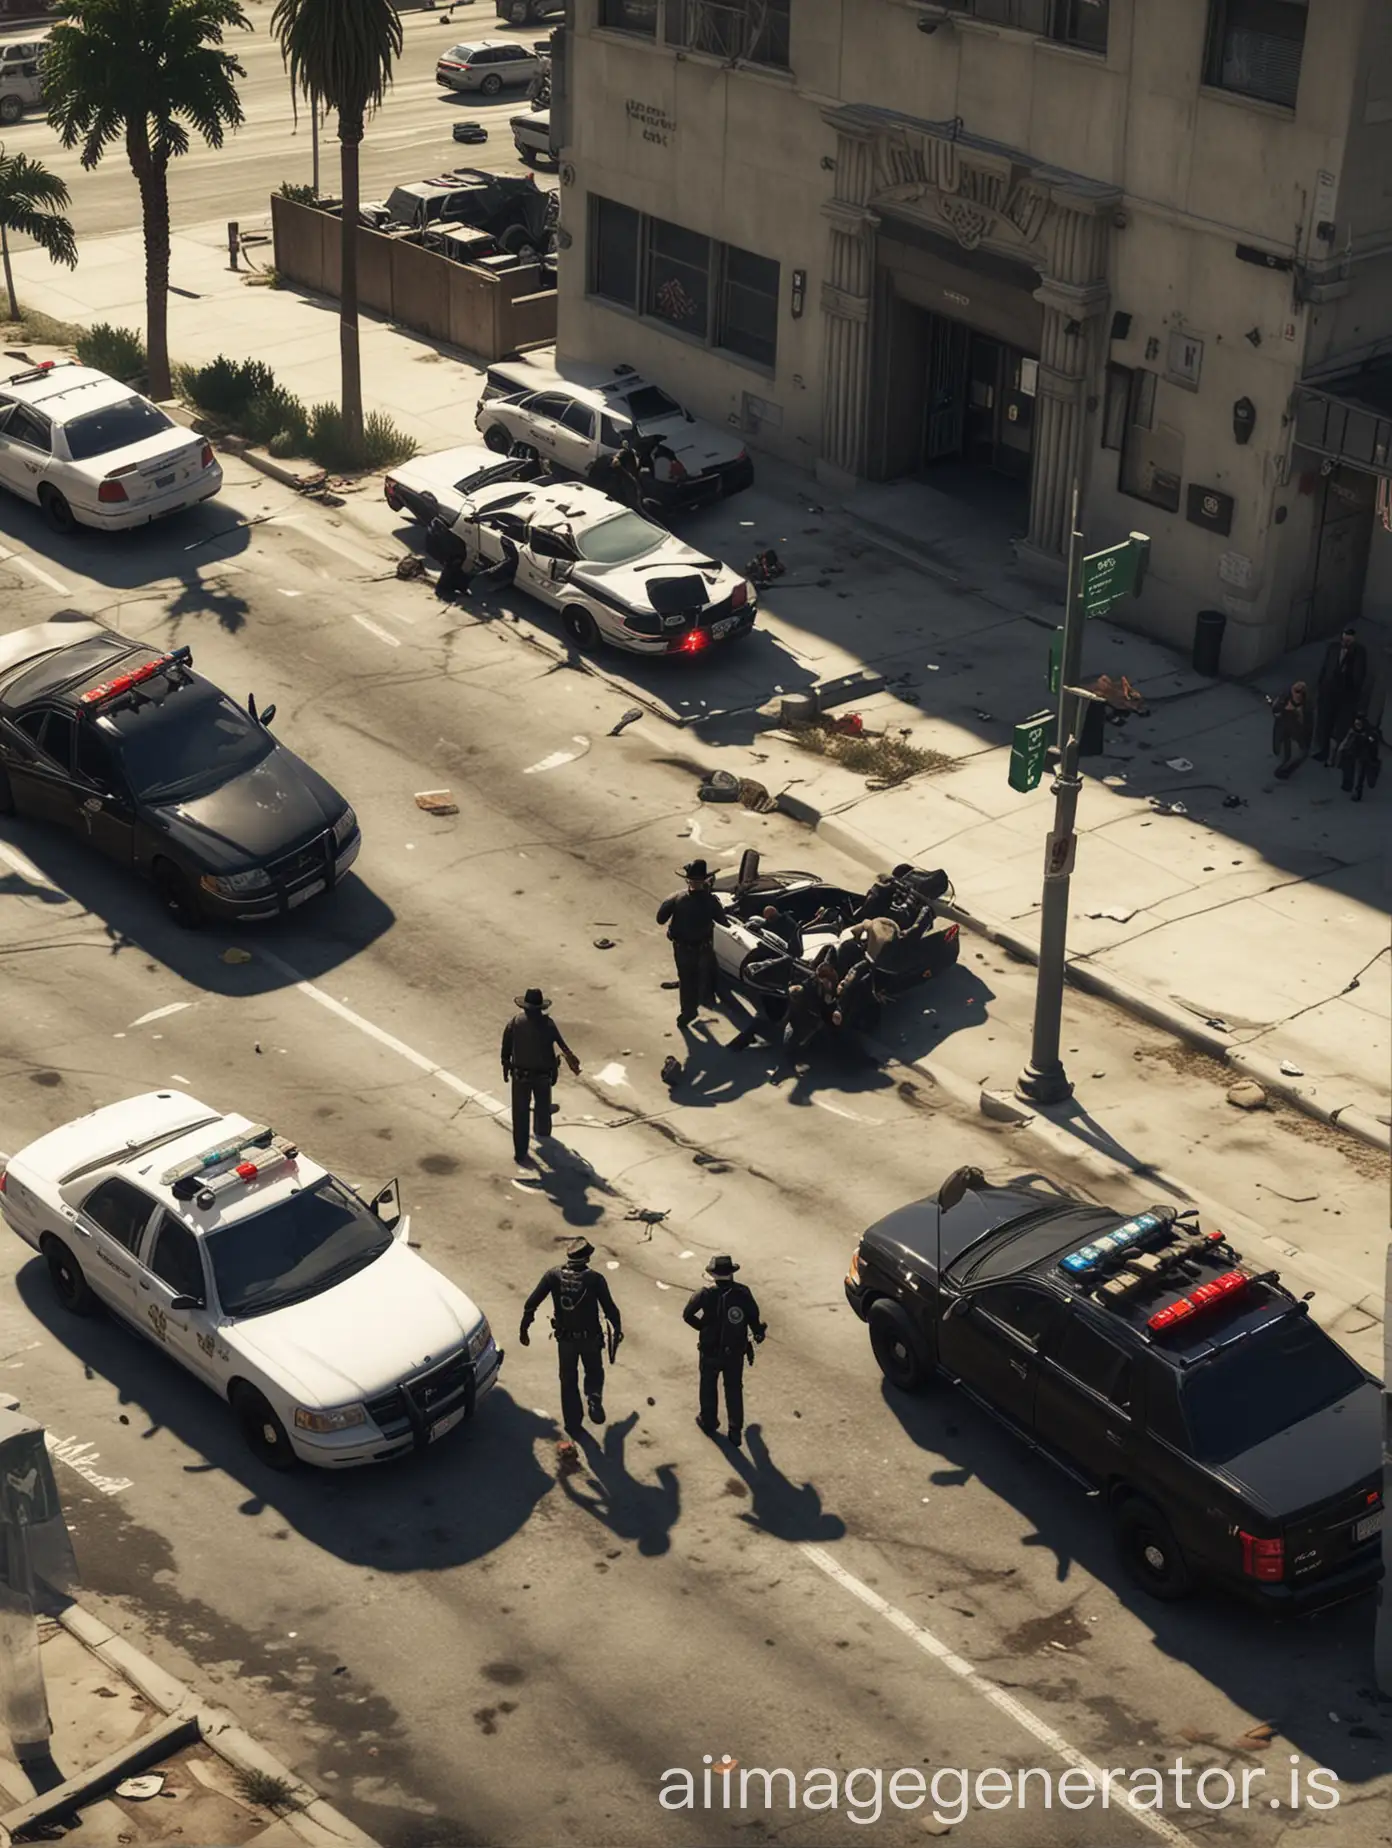 Sheriff-Negotiating-with-Robbers-in-Los-Angeles-Bank-Heist-GTA-V-Style